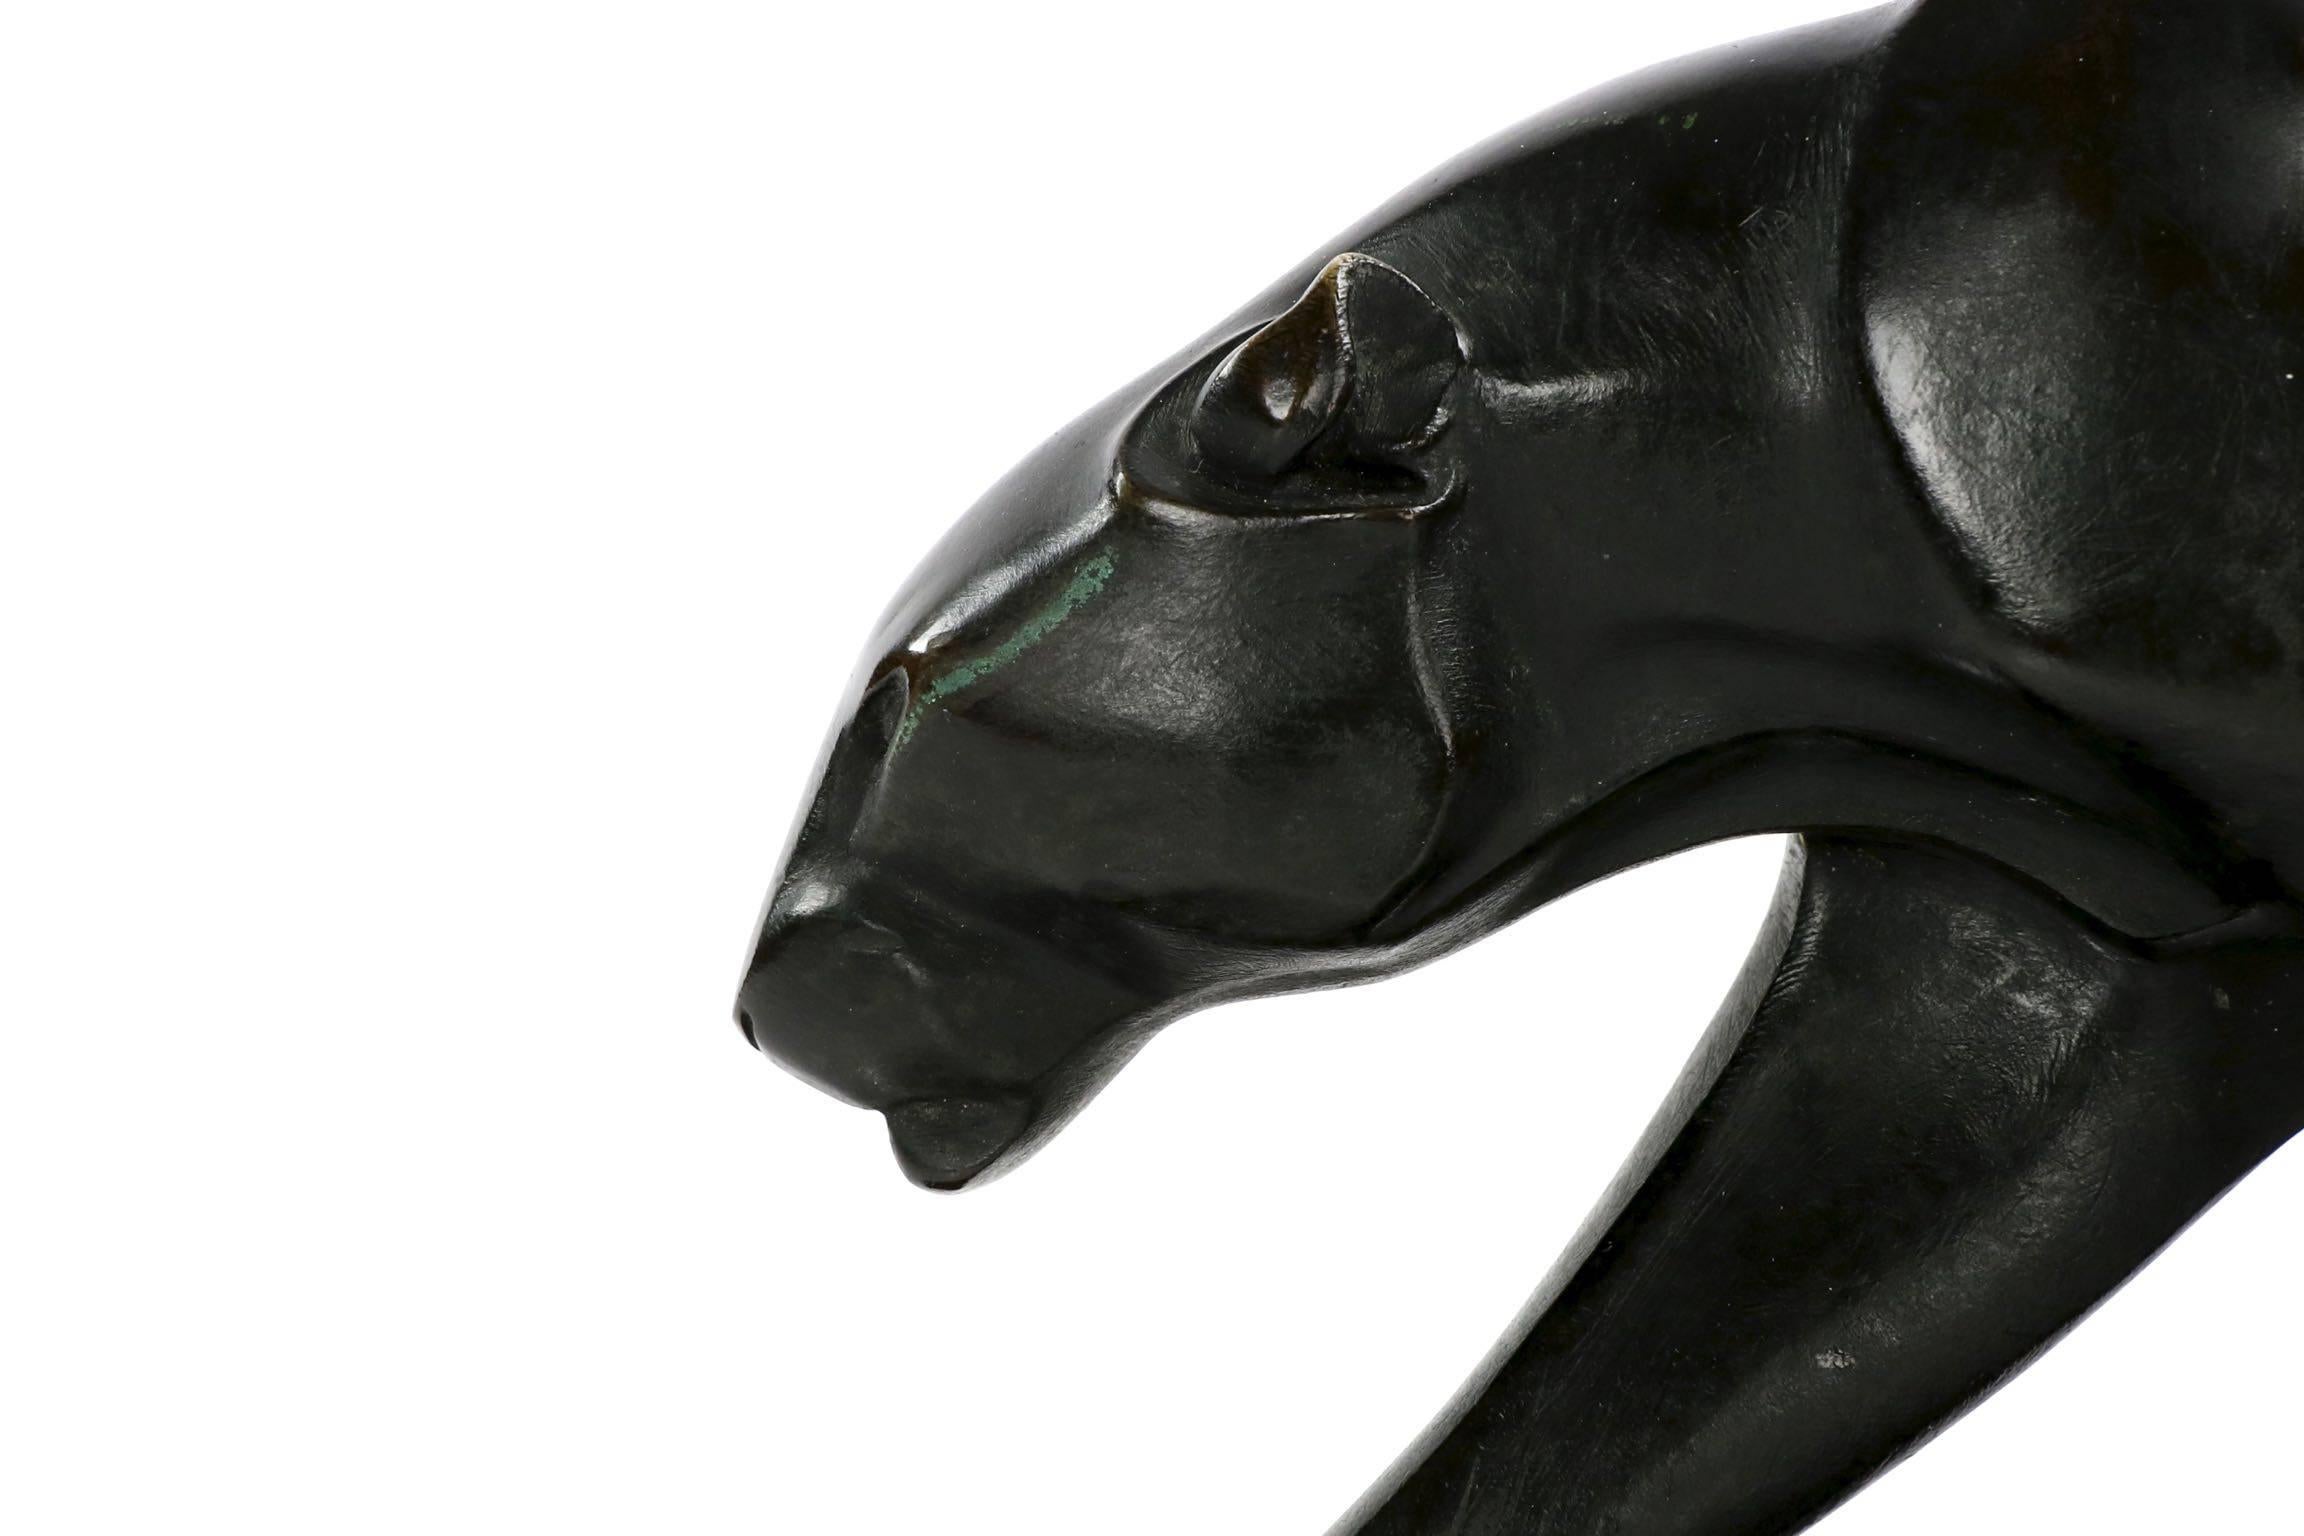 A powerful and sleek model of a black panther walking, this work captures the Art Deco movement with its mechanized minimalism and proportions while in every way representing the spirit of the Animalier school. A trained animalier, Maurice Prost was